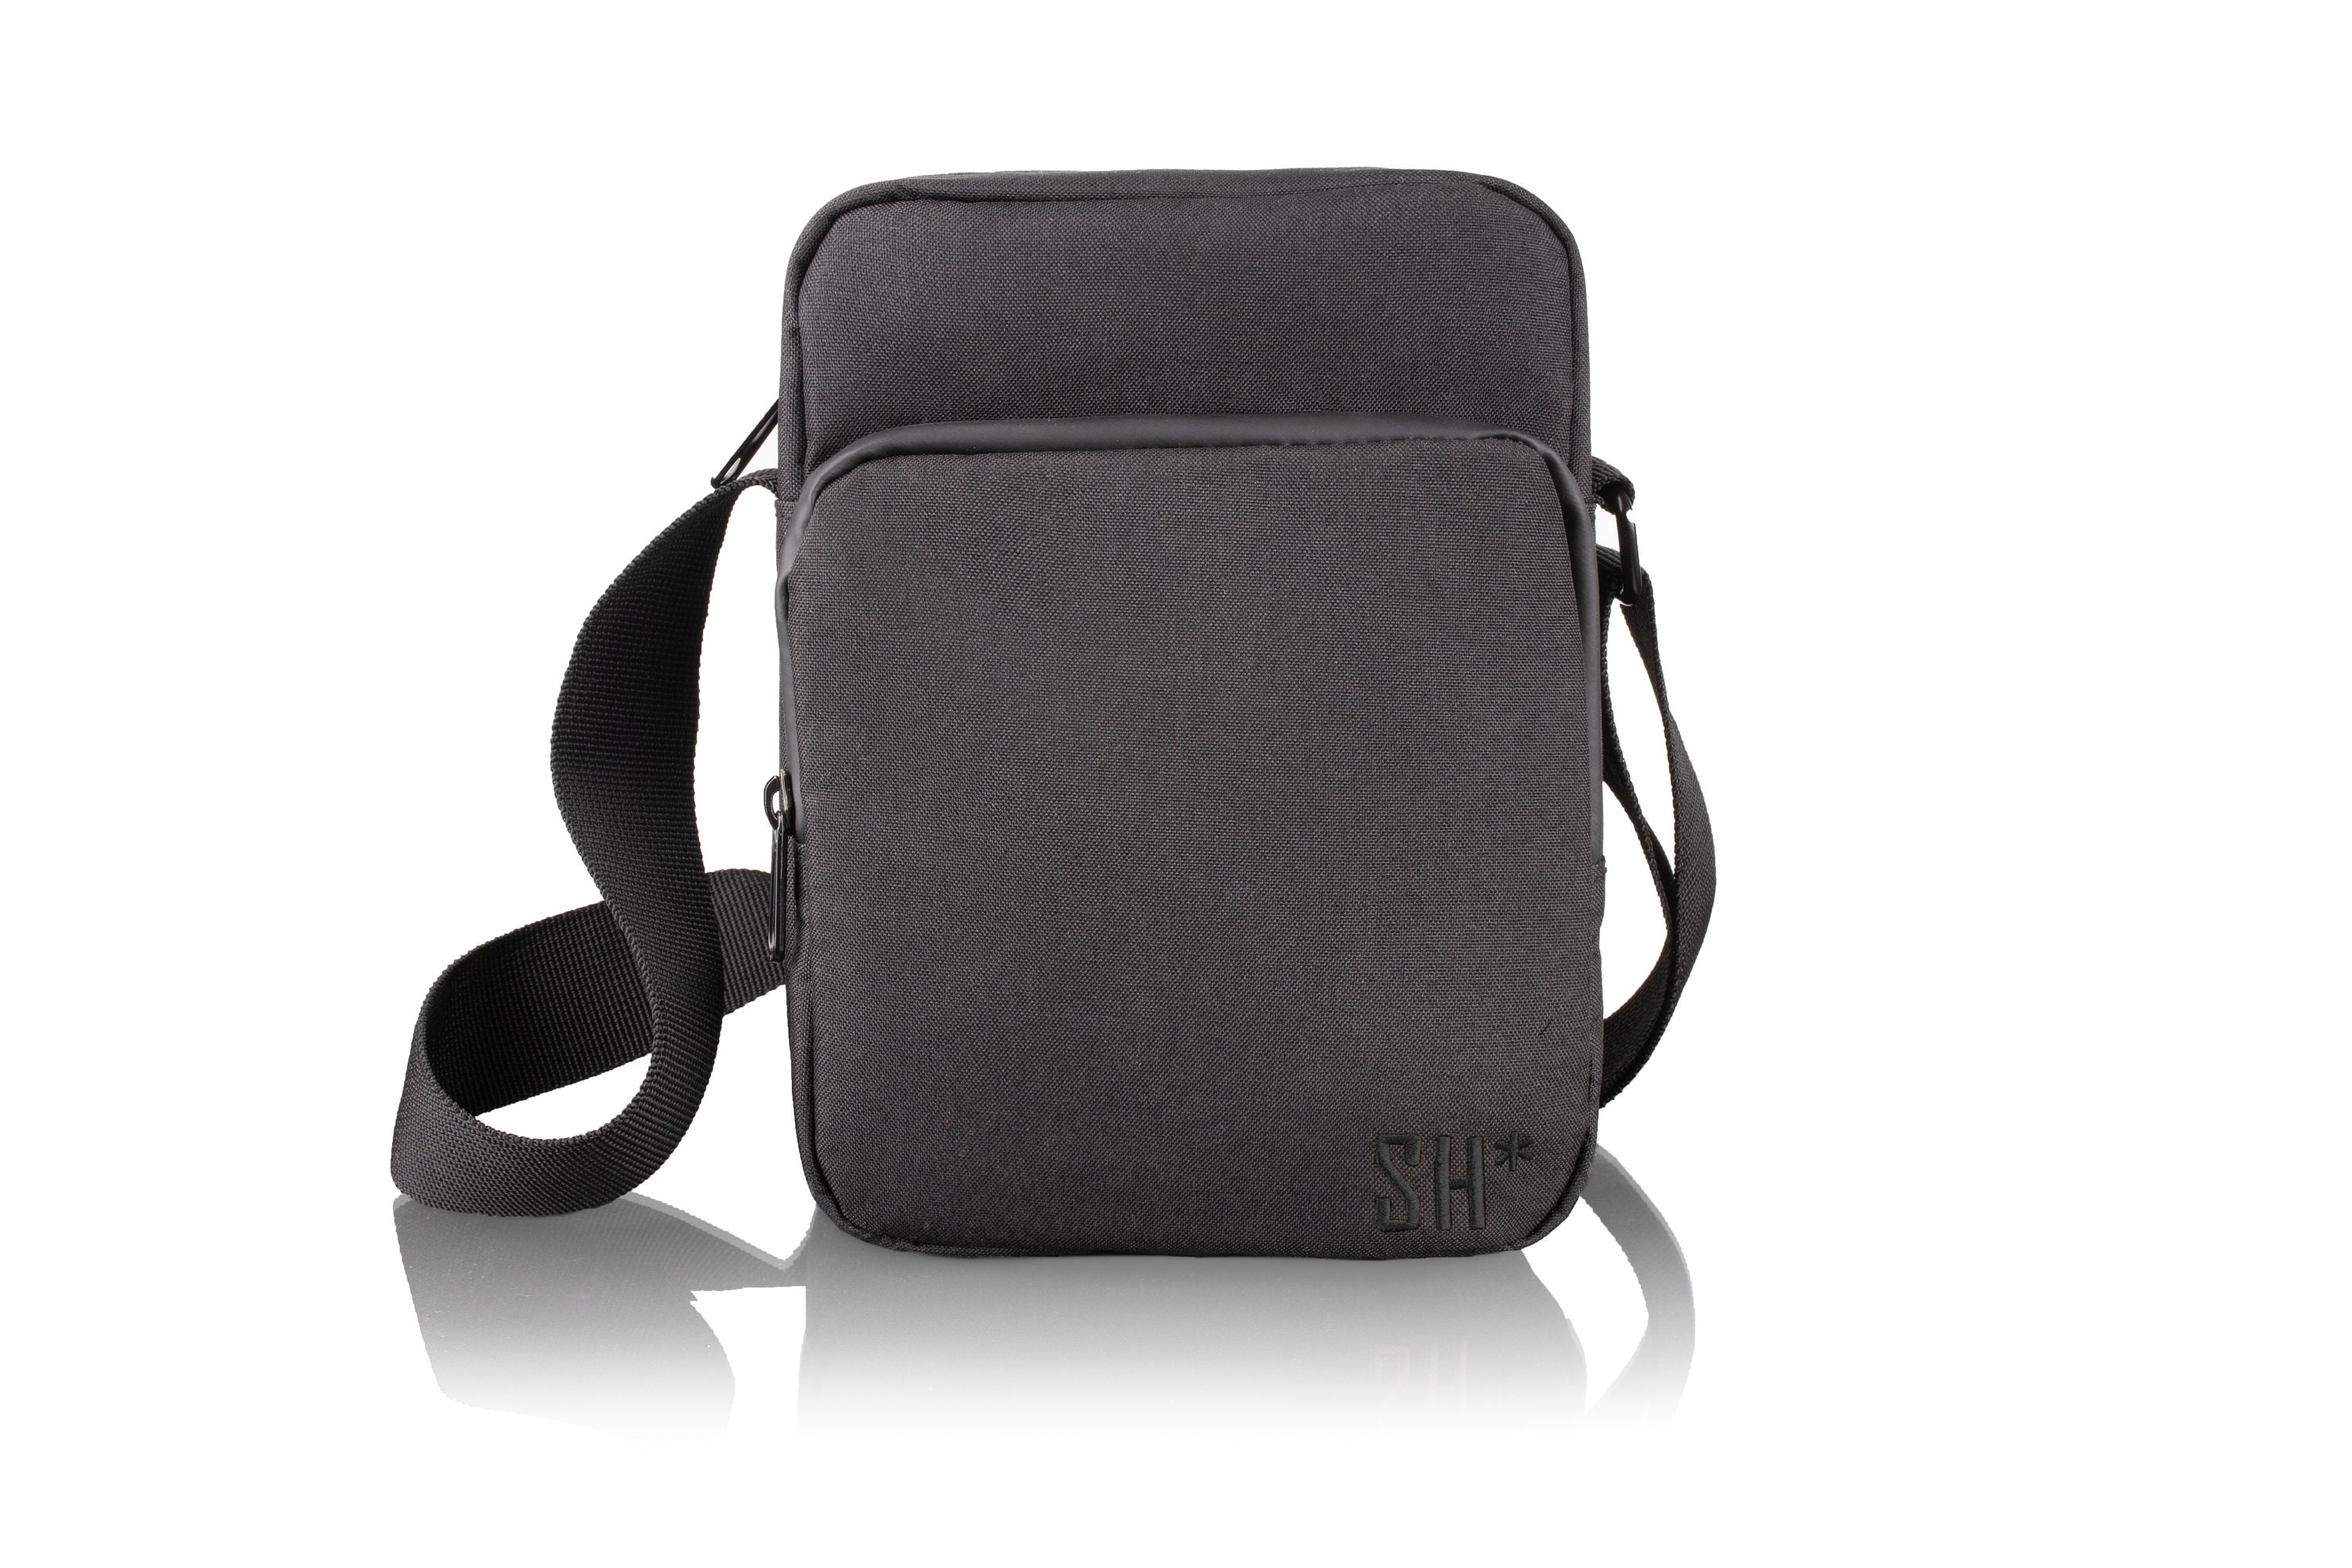 ODOR-PROOF DESIGNER POUCH – Canna Style